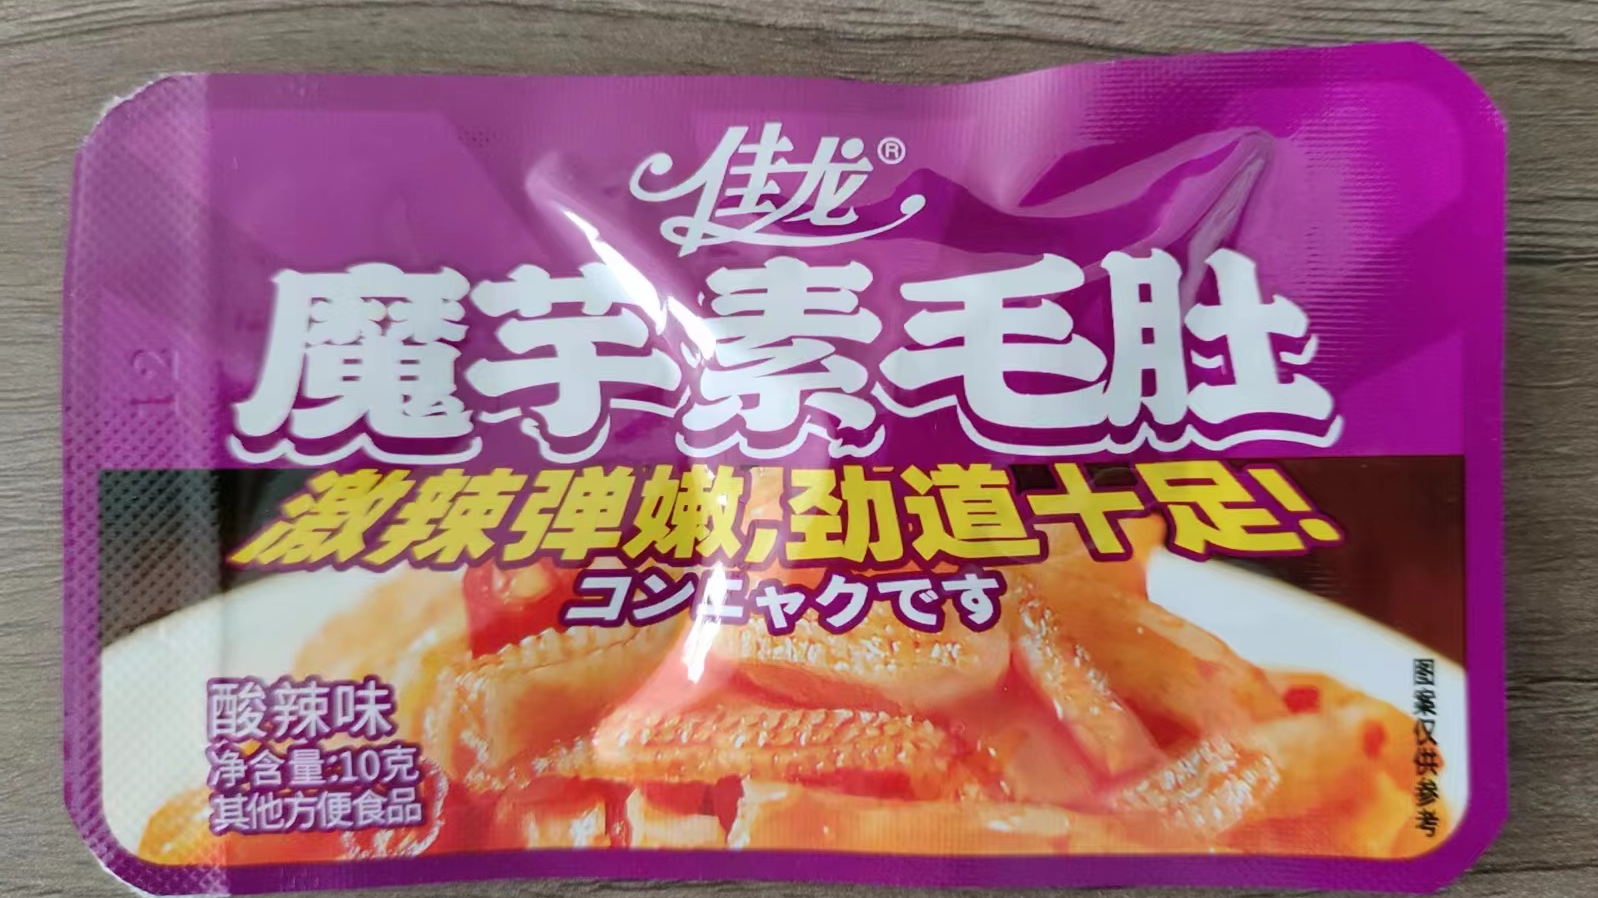 10g Vegetarian tripe -Sour and Spicy flavor